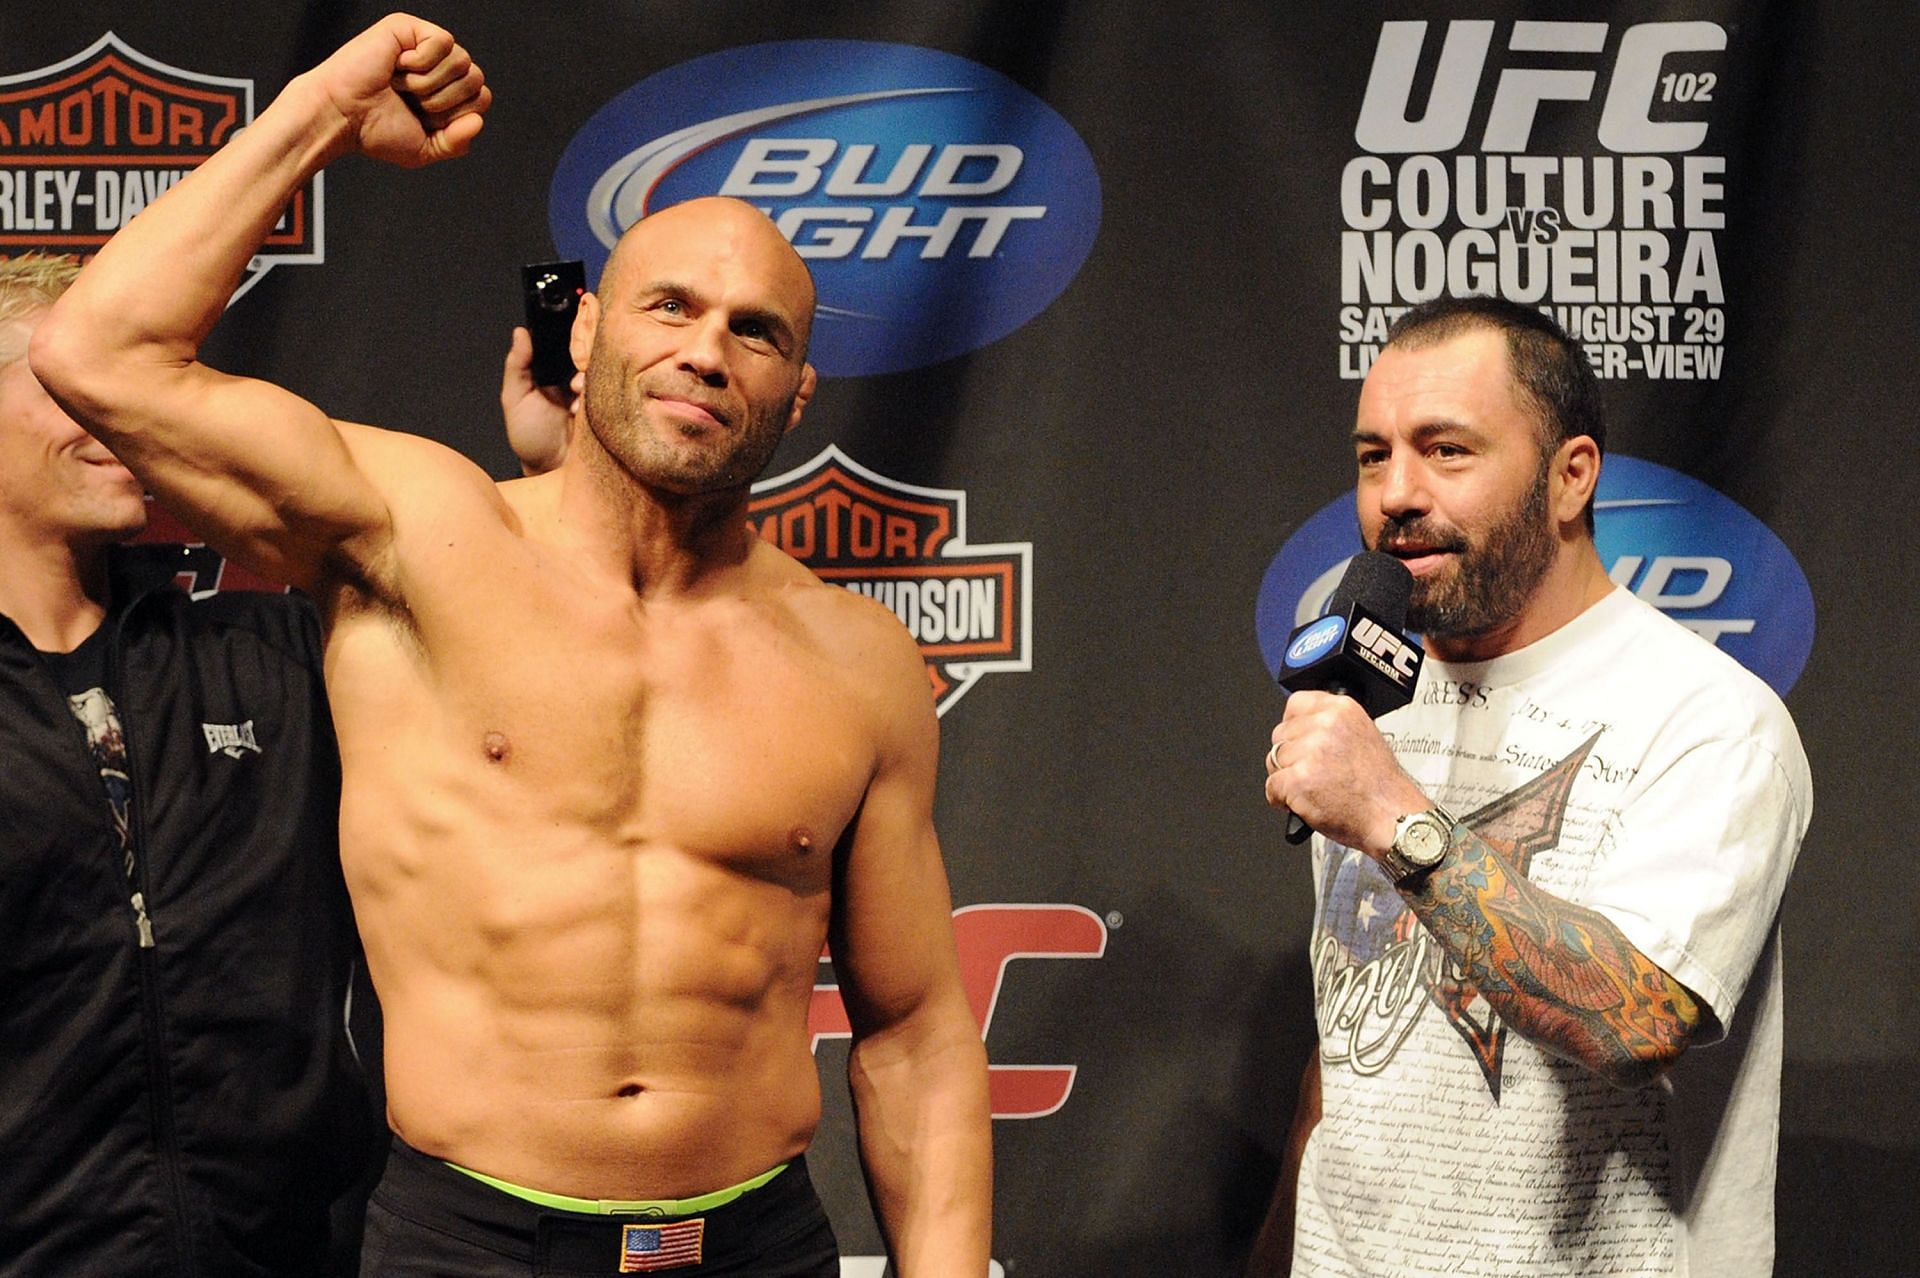 Randy Couture became a superstar despite his fighting style not being that exciting